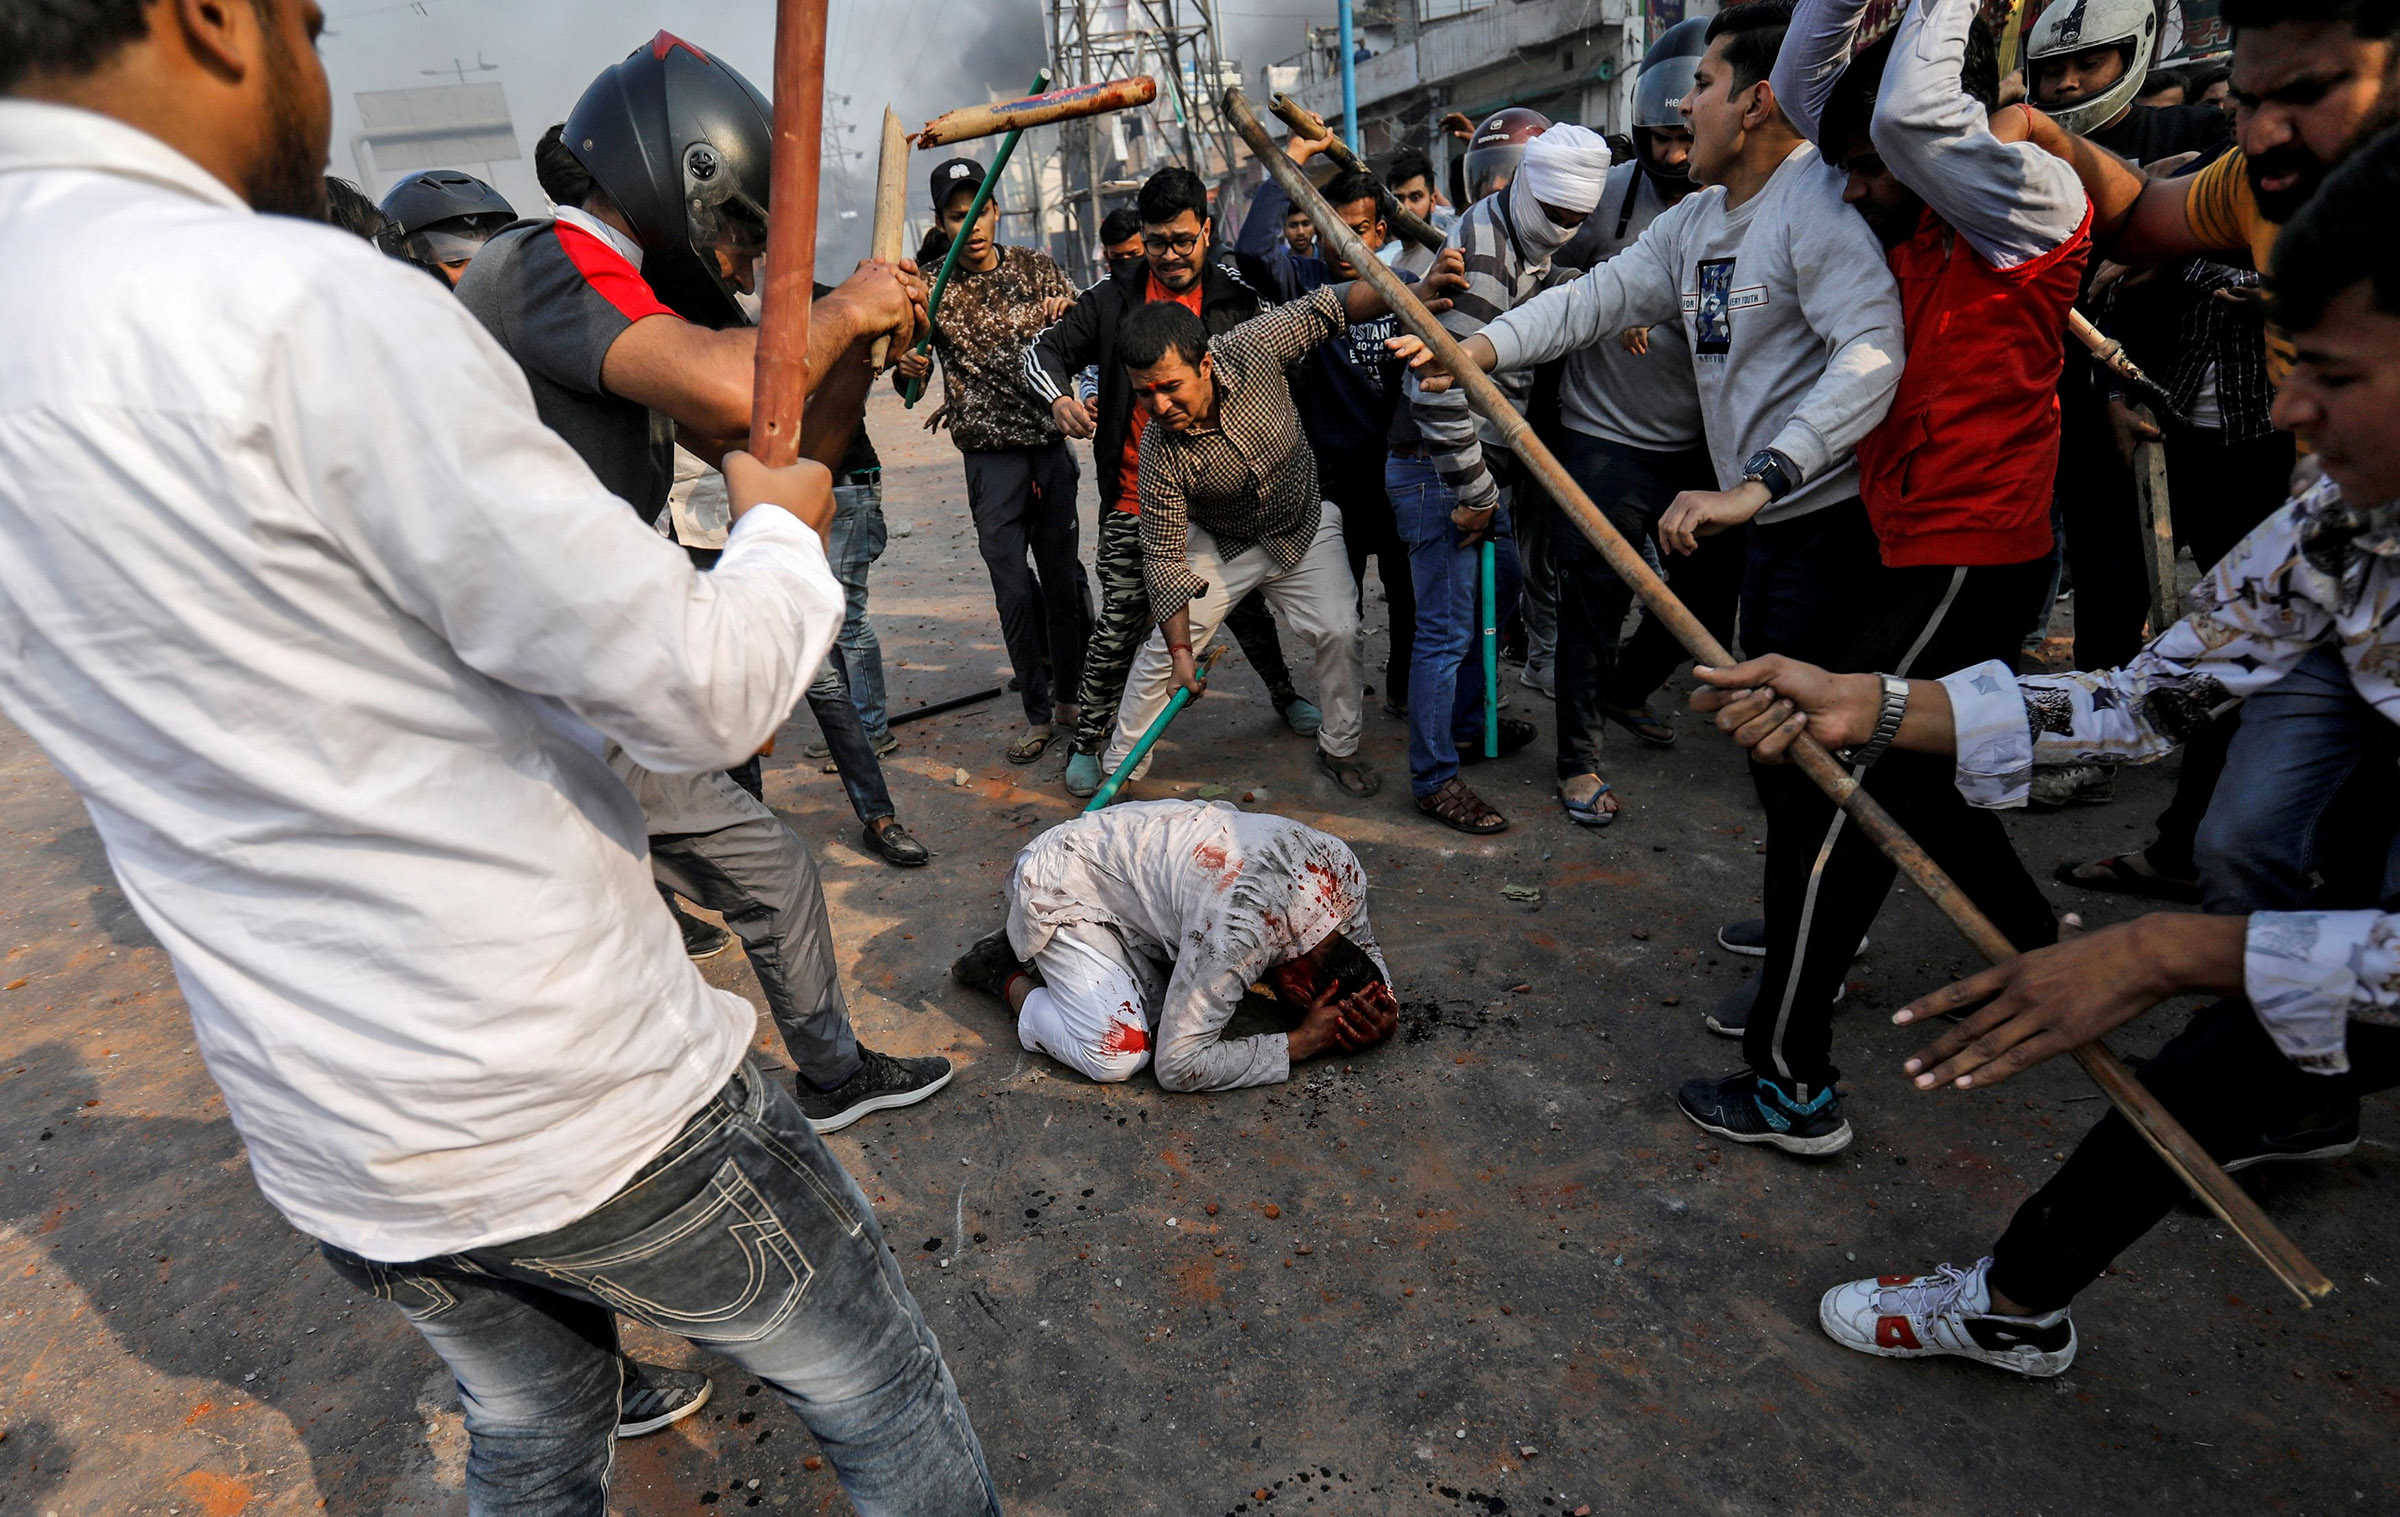 Delhi Riots: What's Next for India's Muslims? | Time